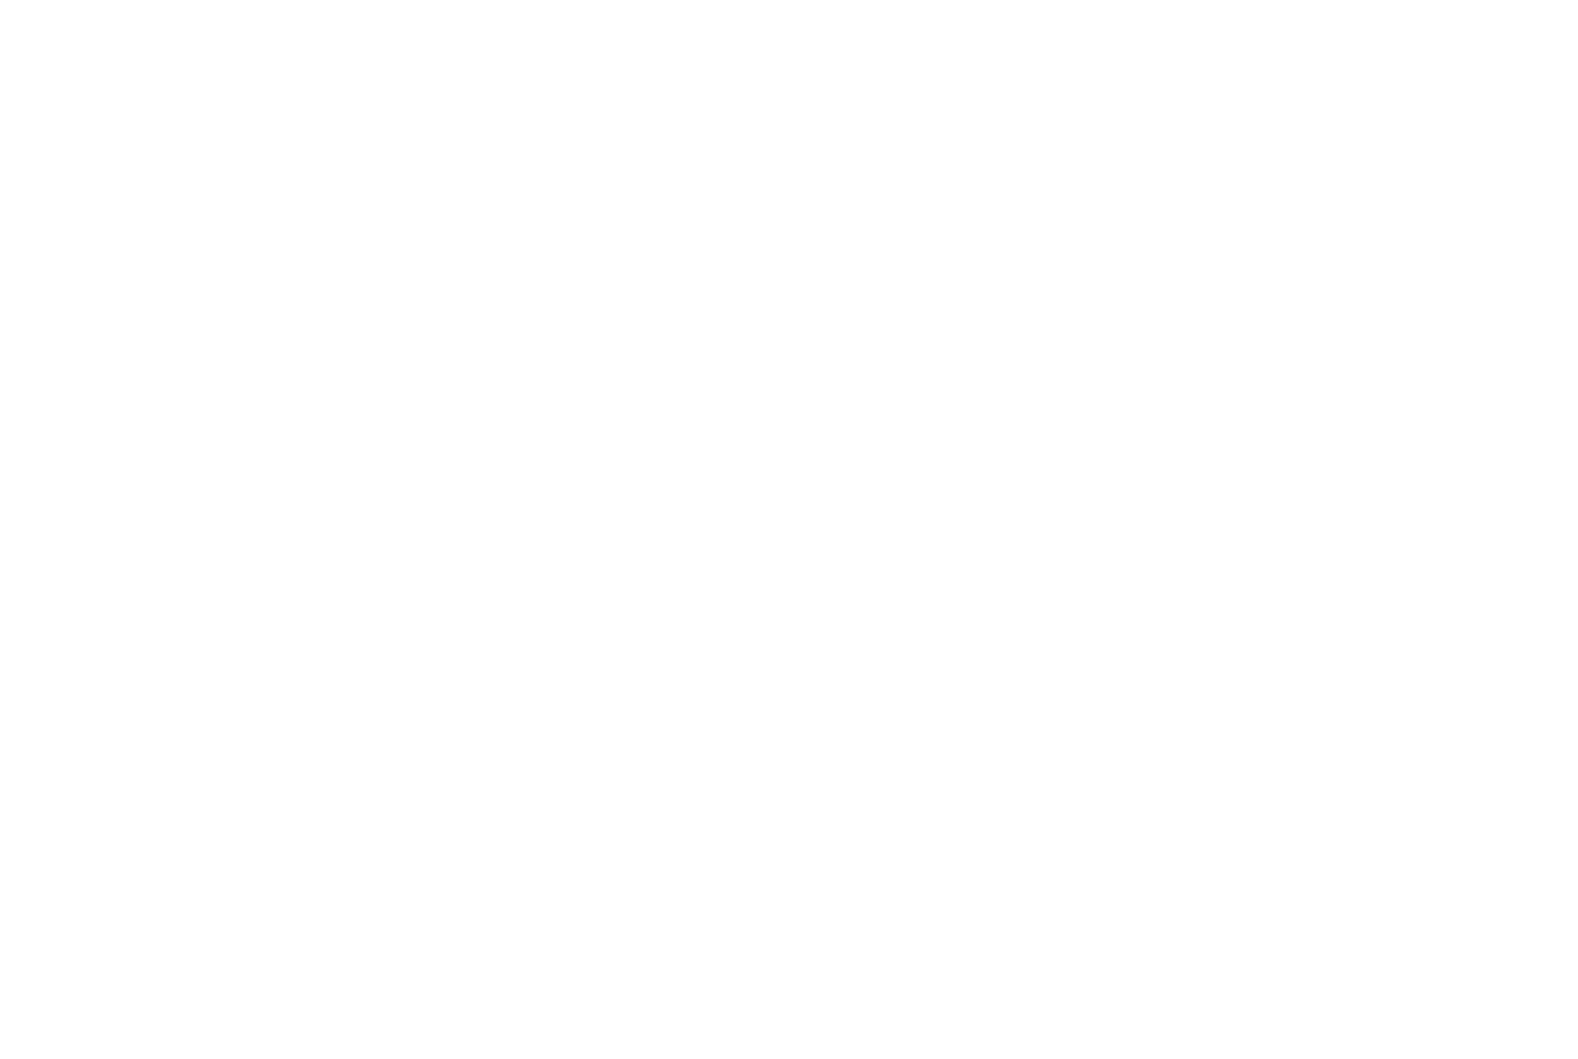 Intact Financial logo for dark backgrounds (transparent PNG)